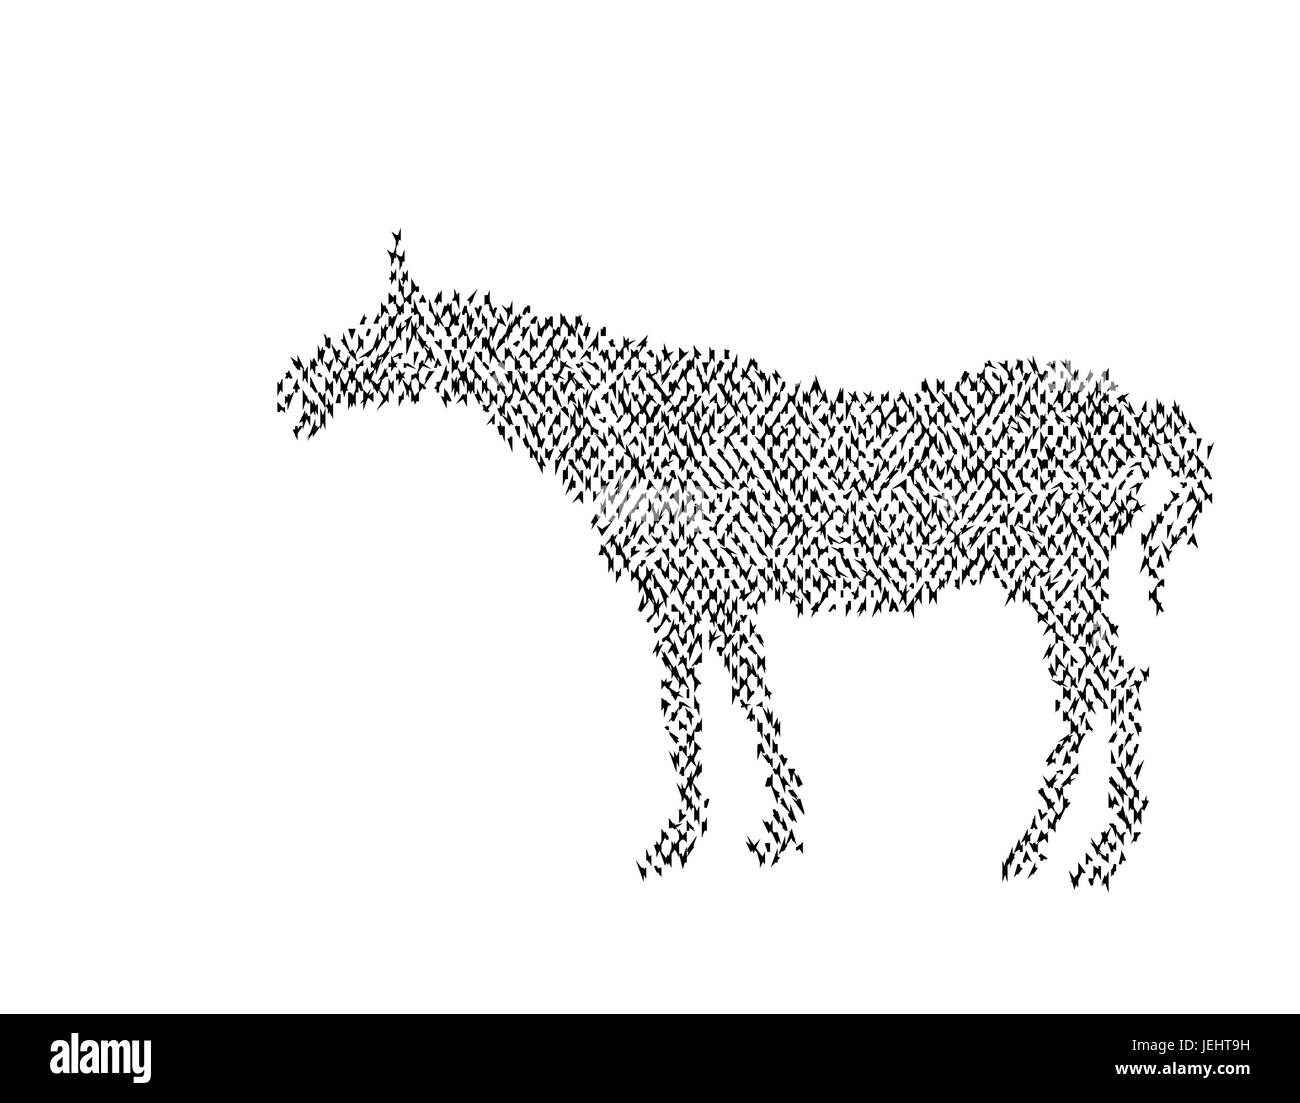 young horse in the steppe. Black silhouette of a horse. White background. Stock Vector